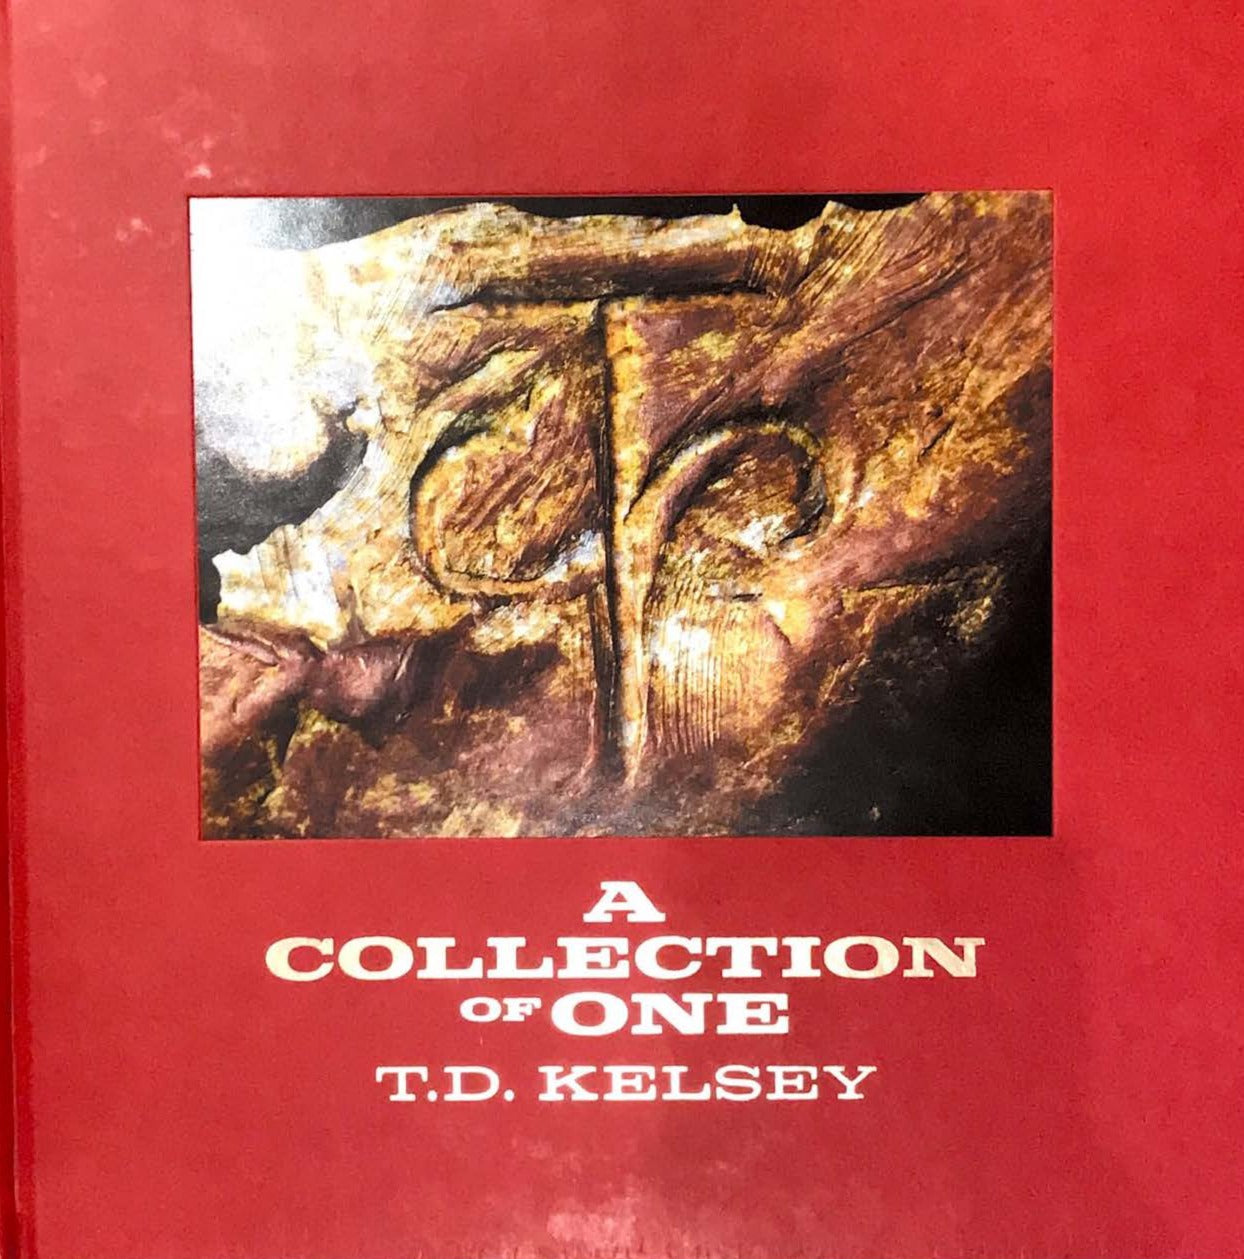 TD Kelsey collection of one sculptor sculpture red book coffee table hardcover art western artist cowboy bronze